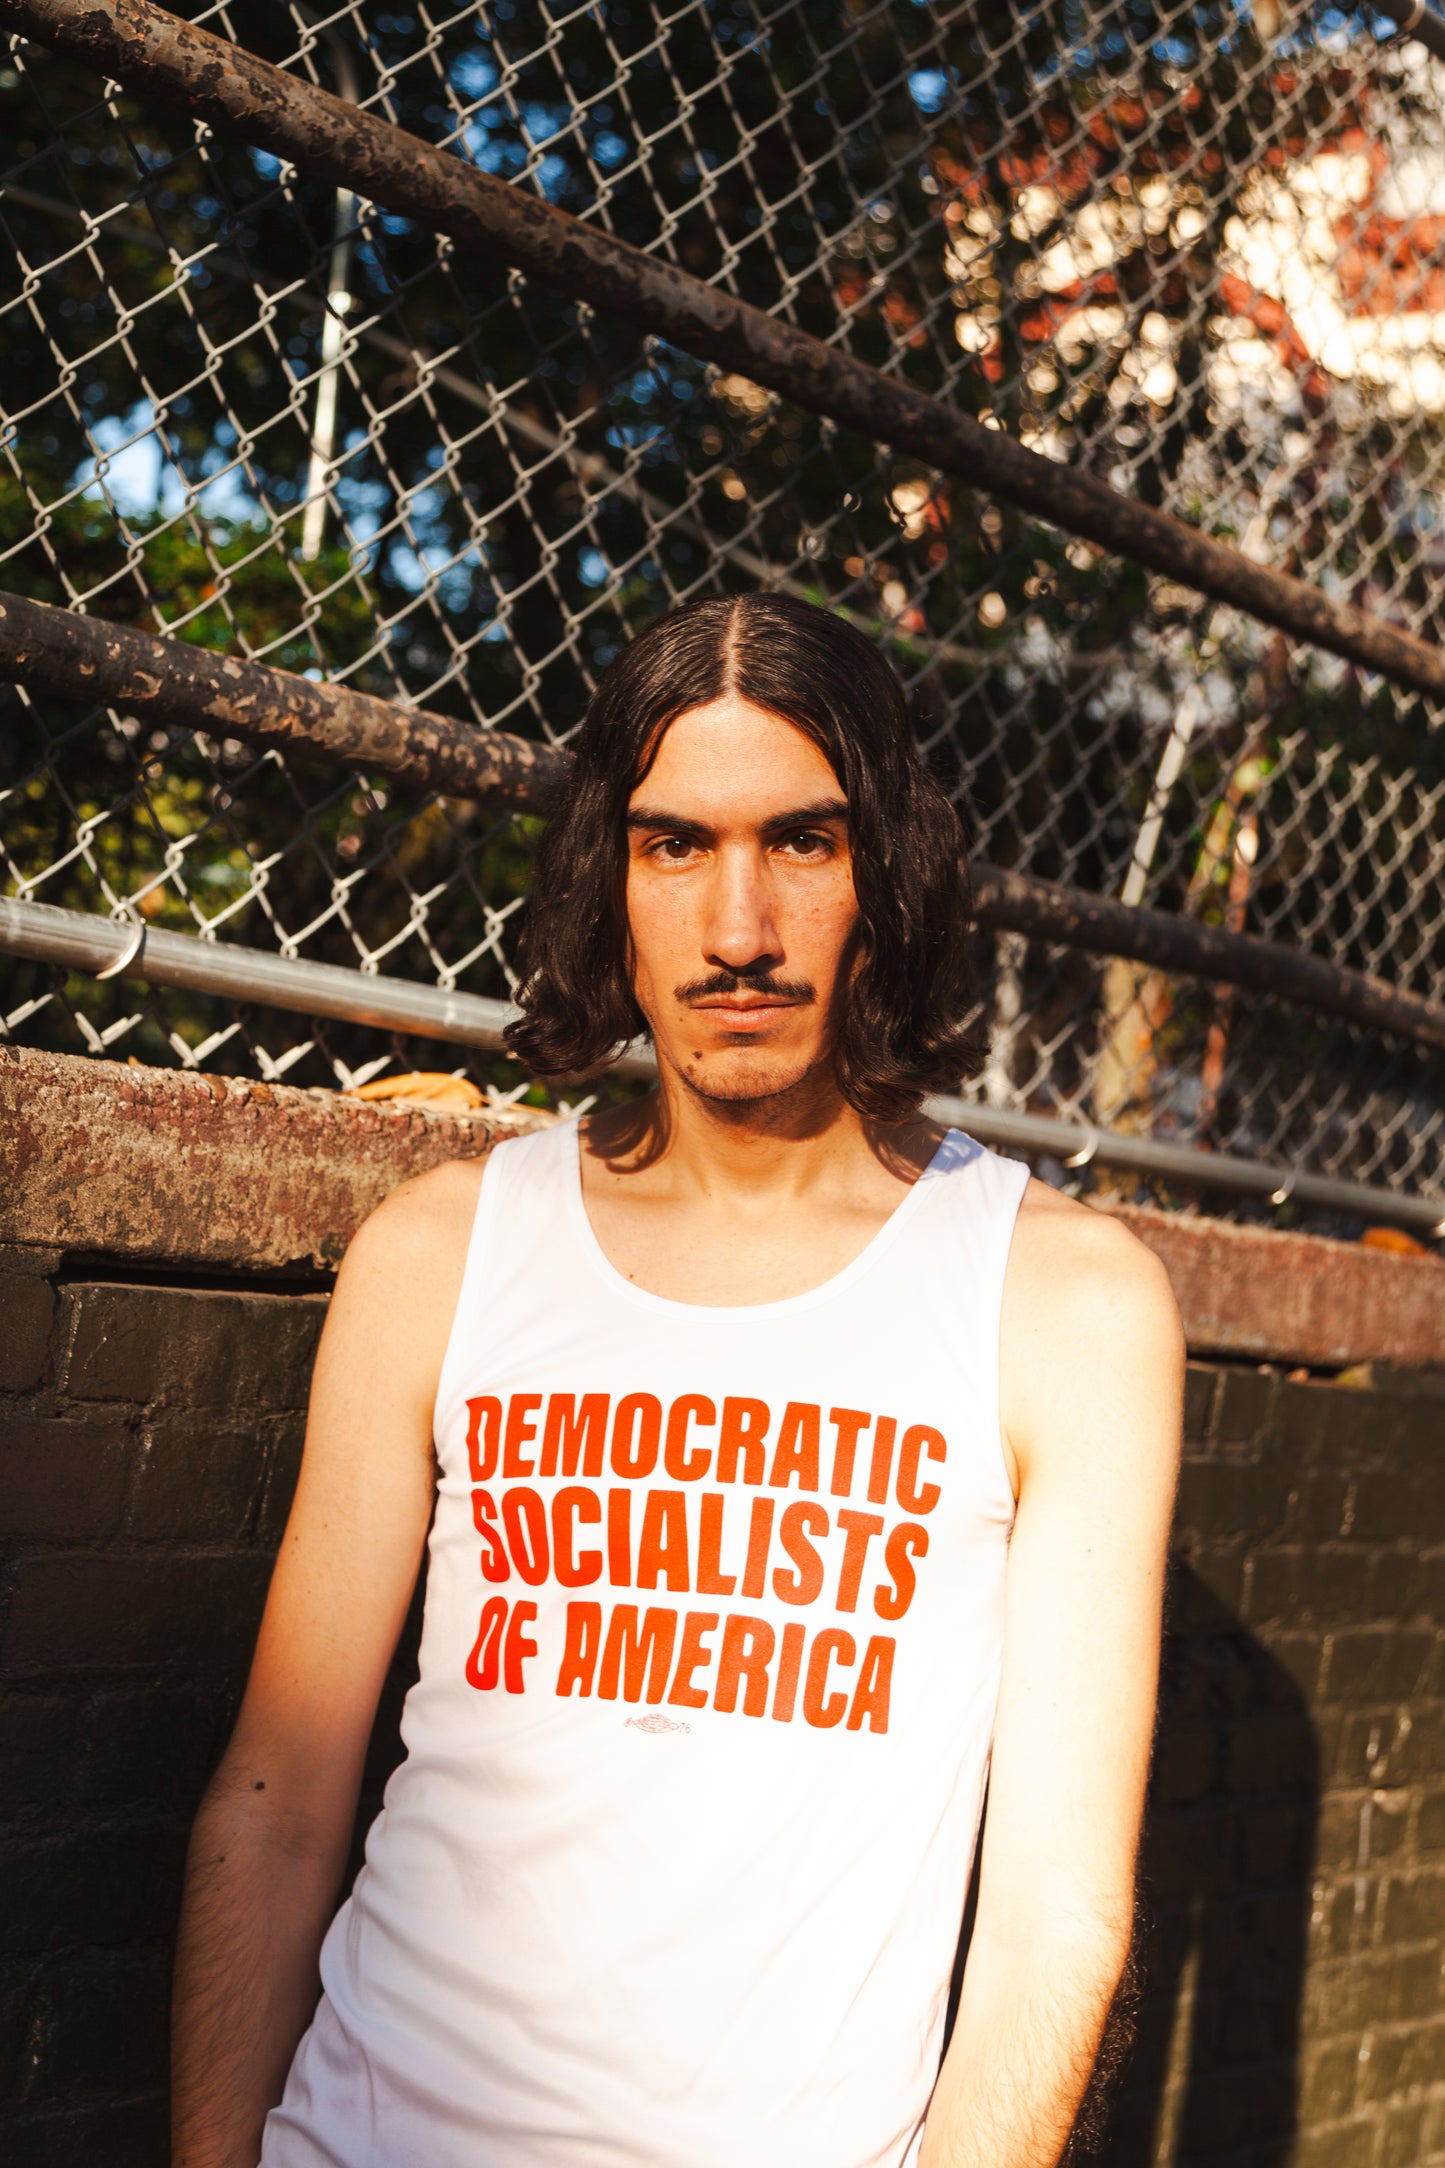 Socialist in a public park wearing a white tank top that says DEMOCRATIC SOCIALISTS OF AMERICA 